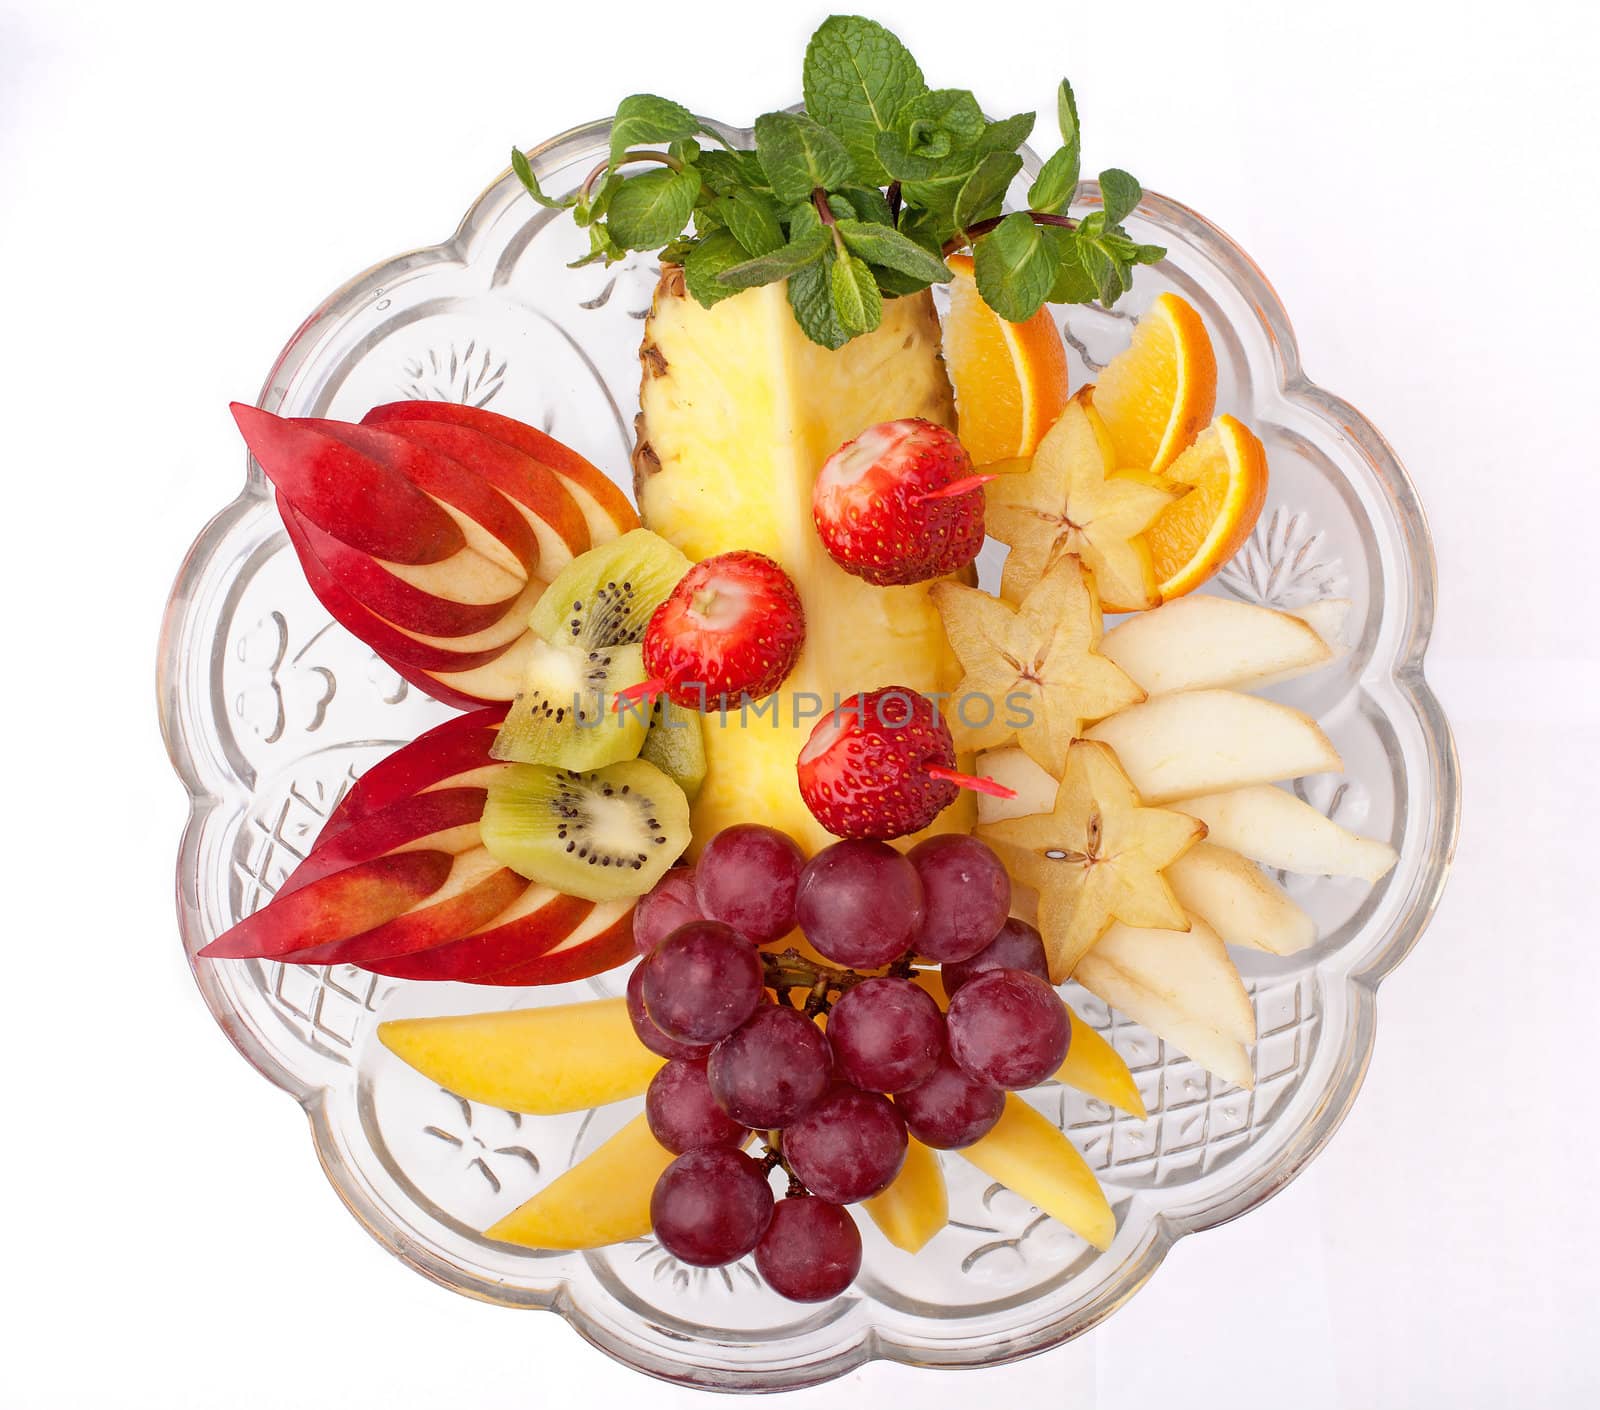 Dish with fresh fruits and berries